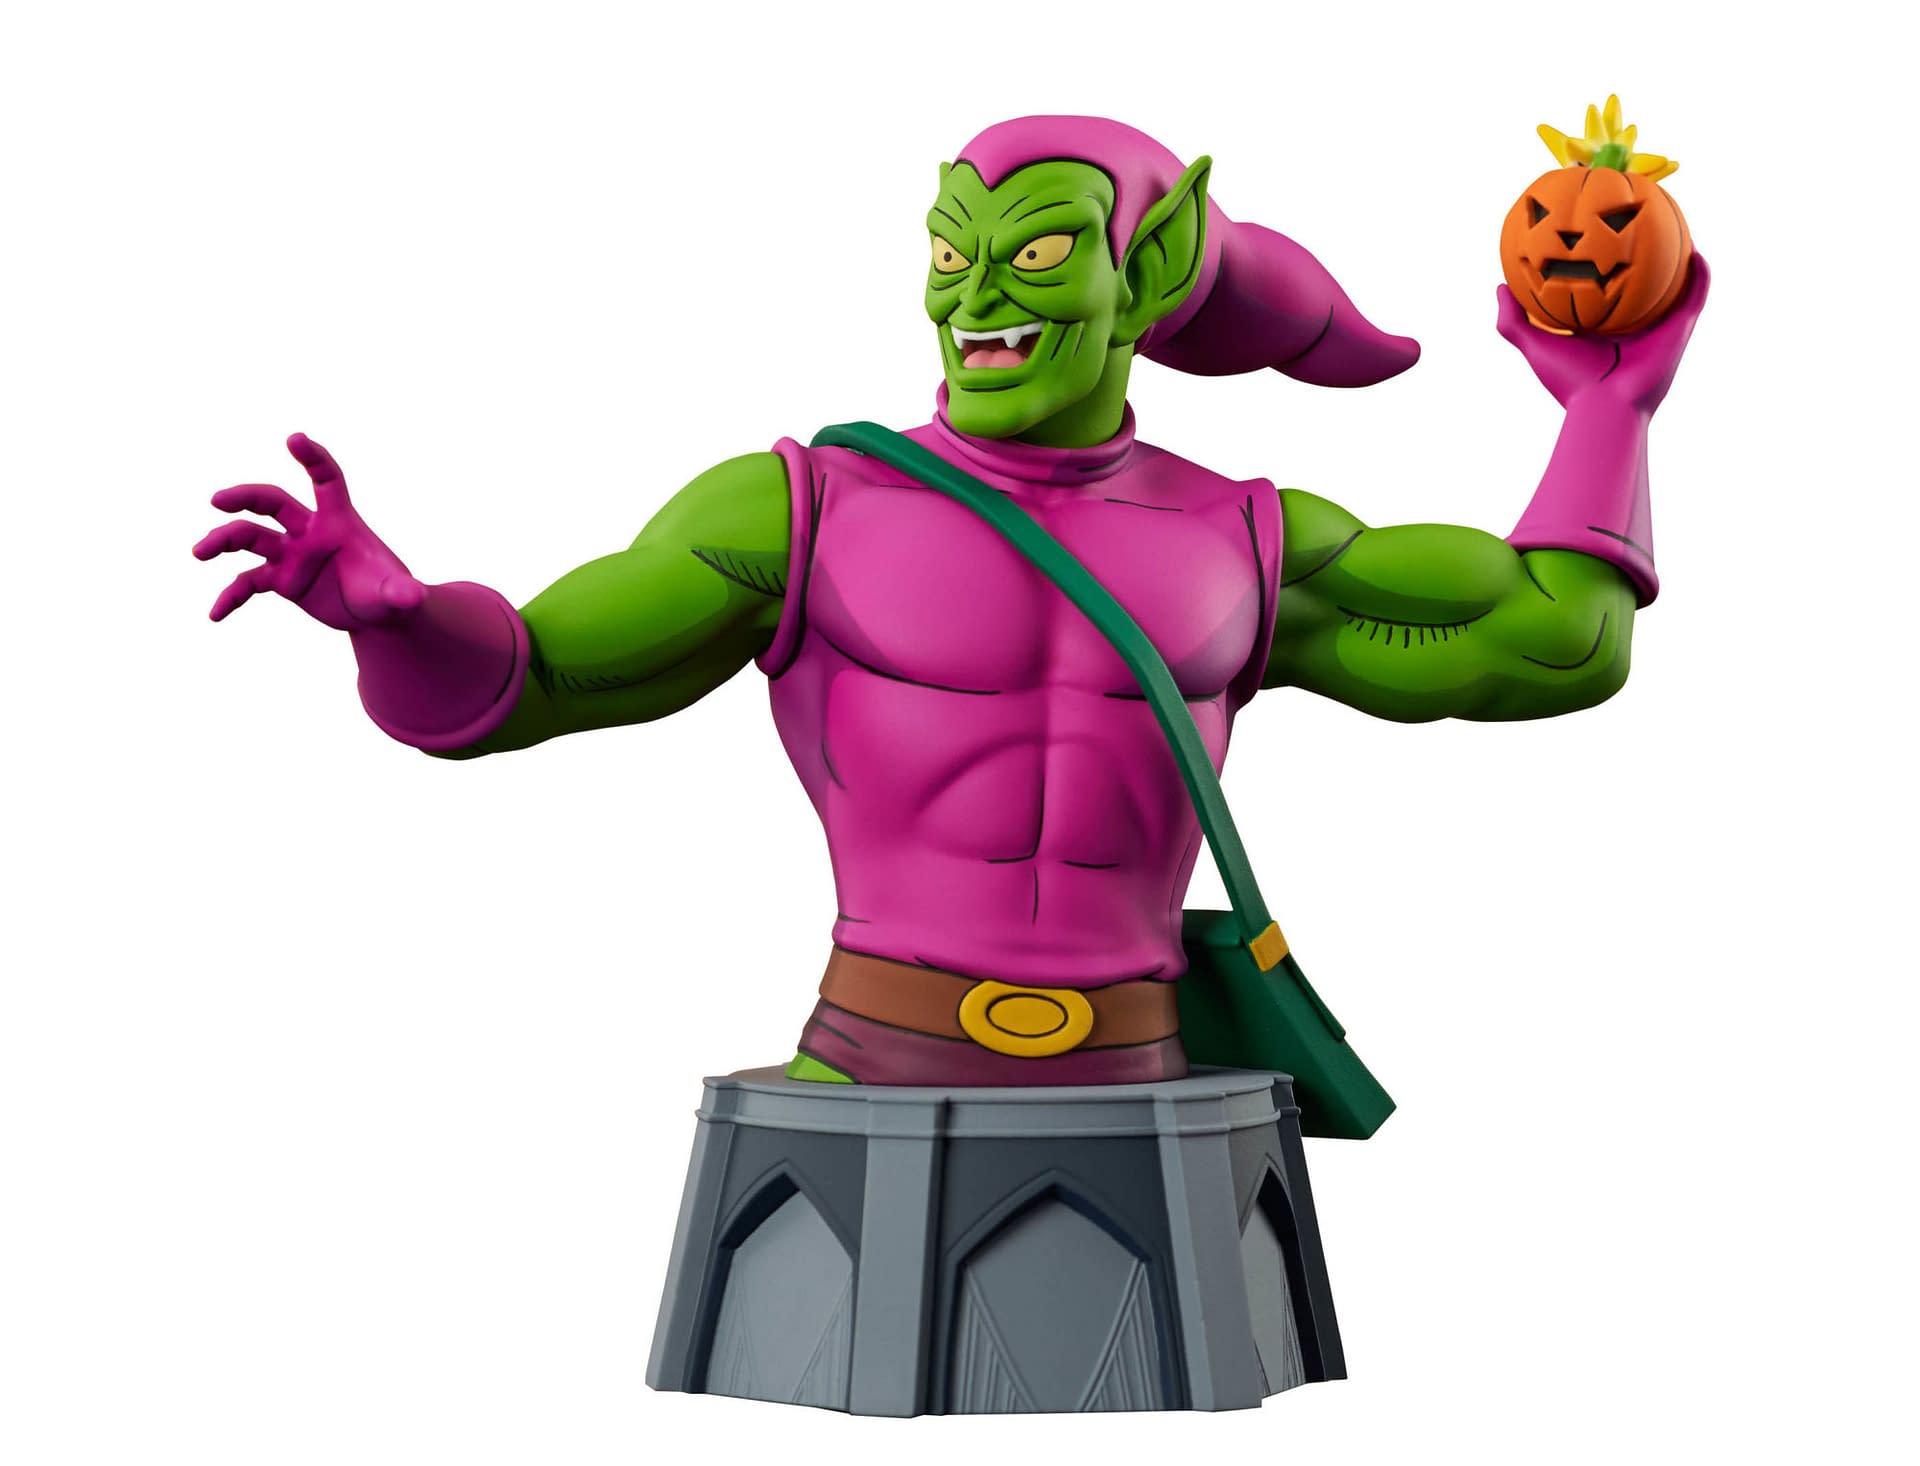 Green Goblin and Daredevil Debut with New Gentle Giant Statues